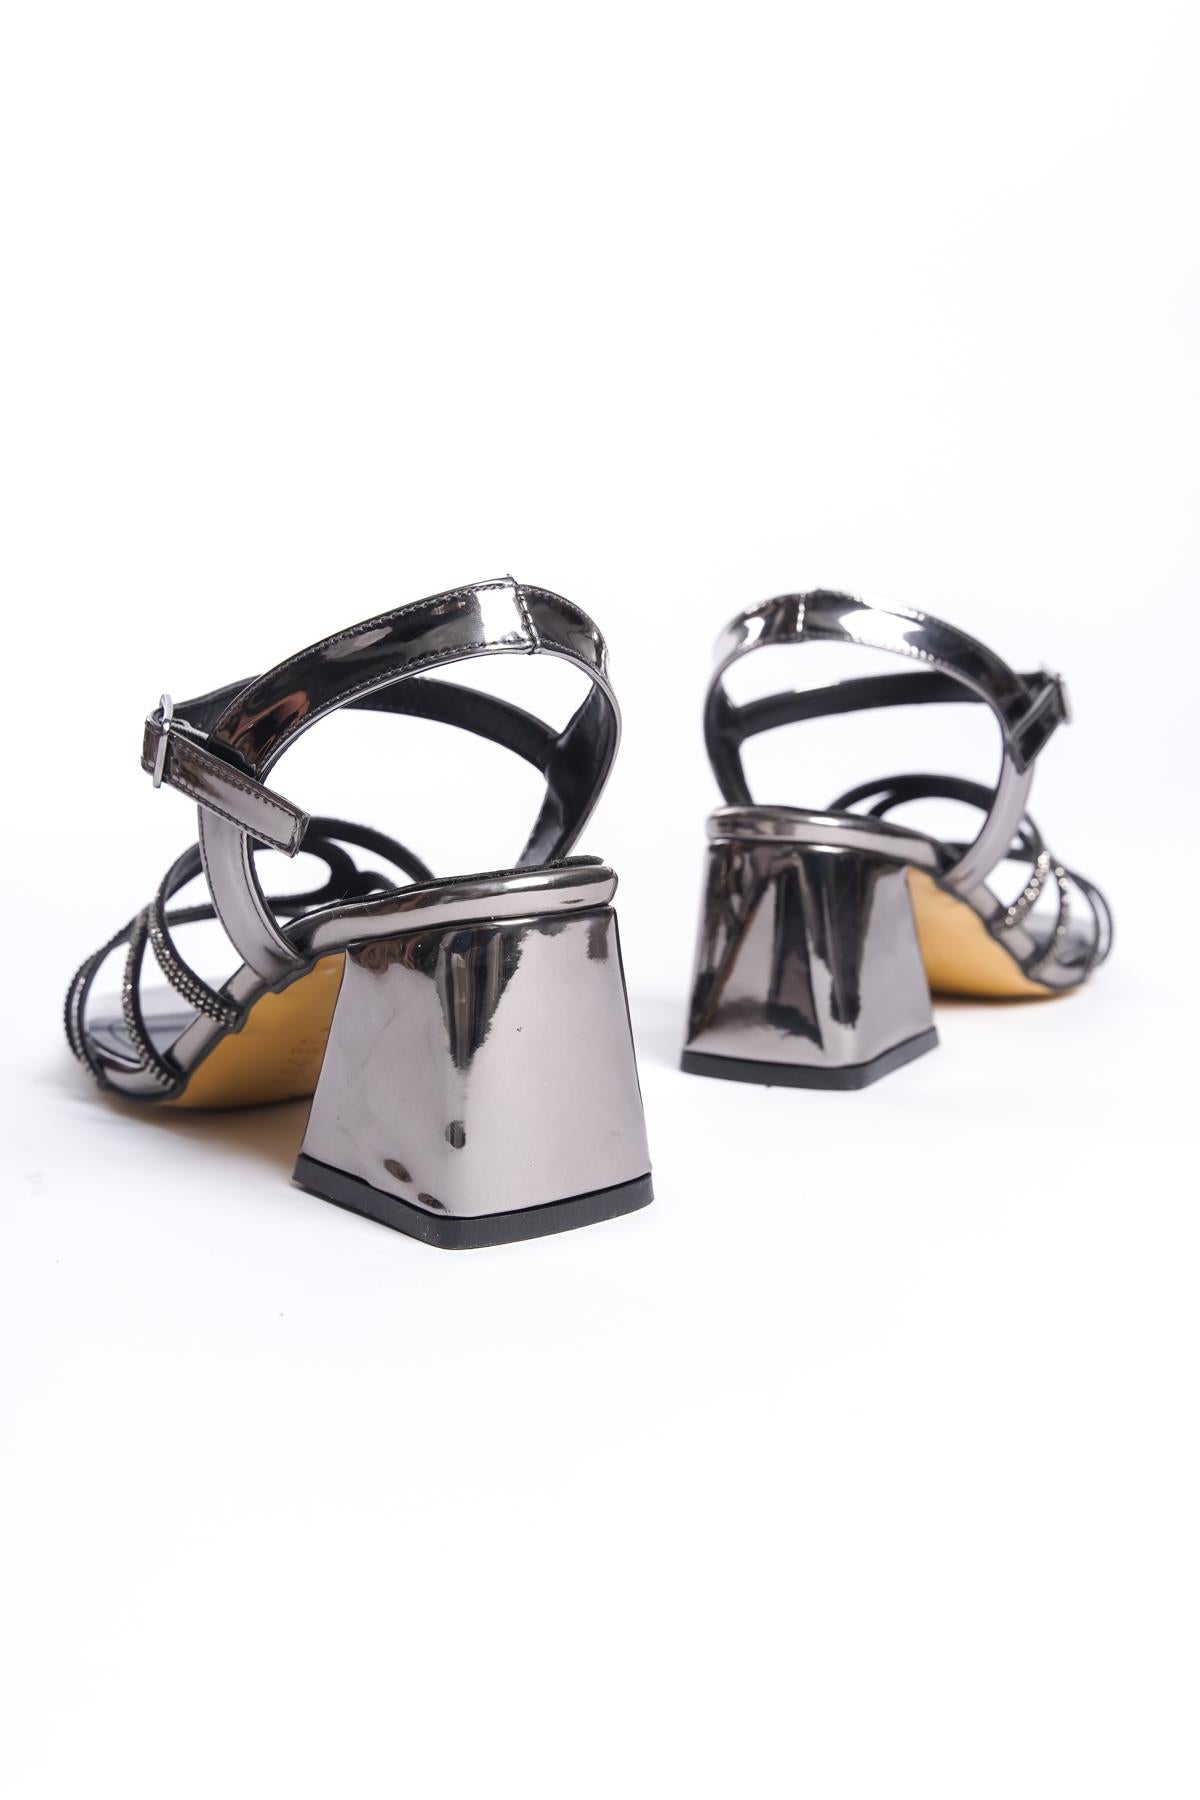 Women's Patent Leather Platinum Low Thick Heel Stone Sandals 5 cm - STREETMODE ™